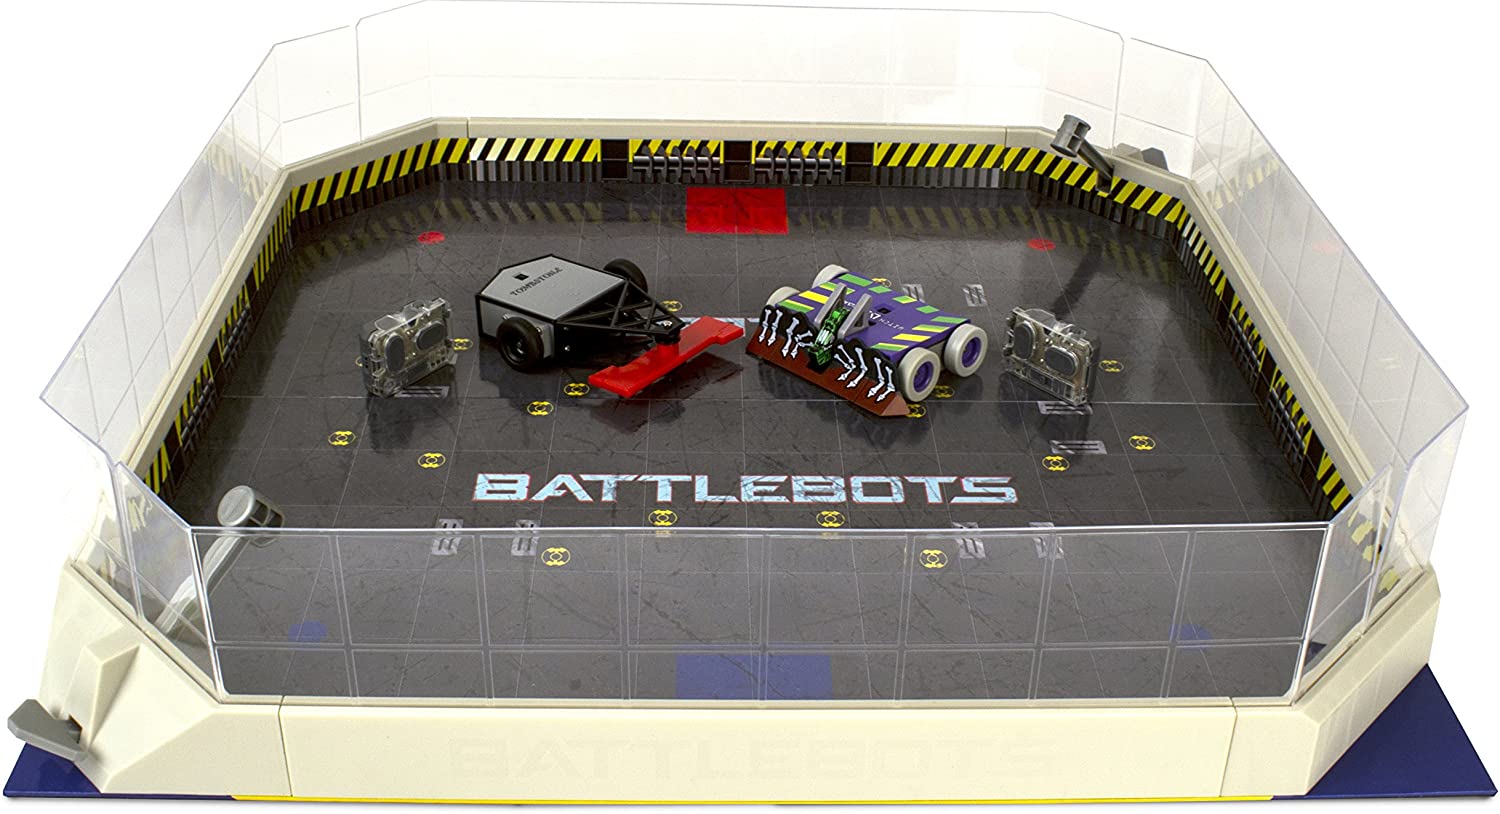 HEXBUG BattleBots Arena Witch Doctor & Tombstone - Battle Bot with Arena Game Board and Accessories - Remote Controlled Toy For Kids - Batteries Included With Hex Bug Robot Set - Hatke